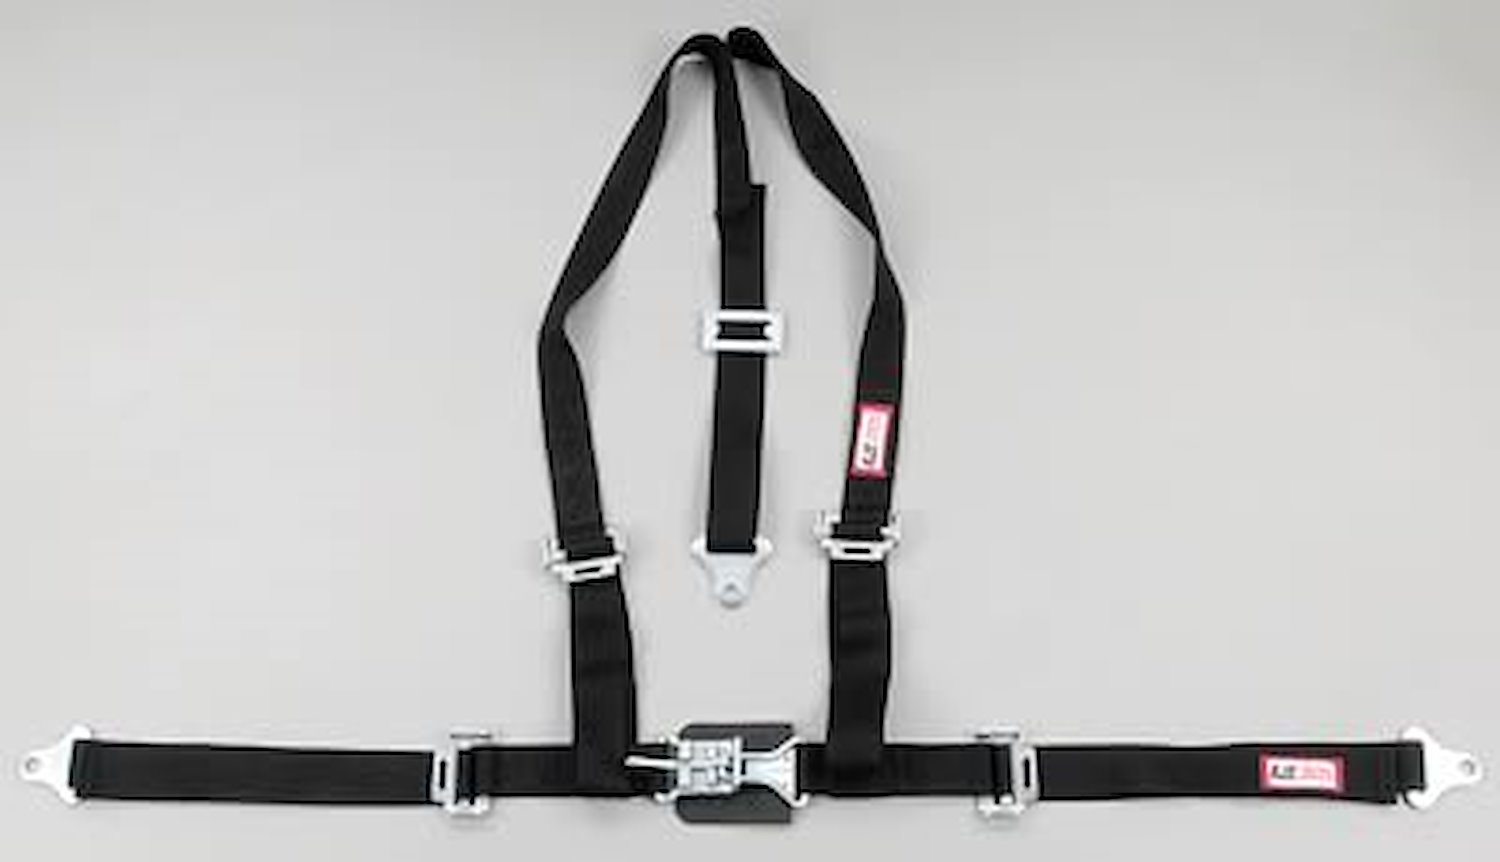 NON-SFI L&L HARNESS 3 PULL UP Lap Belt SNAP SEWN IN 2 S.H. Individual FLOOR Mount w/STERNUM STRAP WRAP/SNAP GRAY